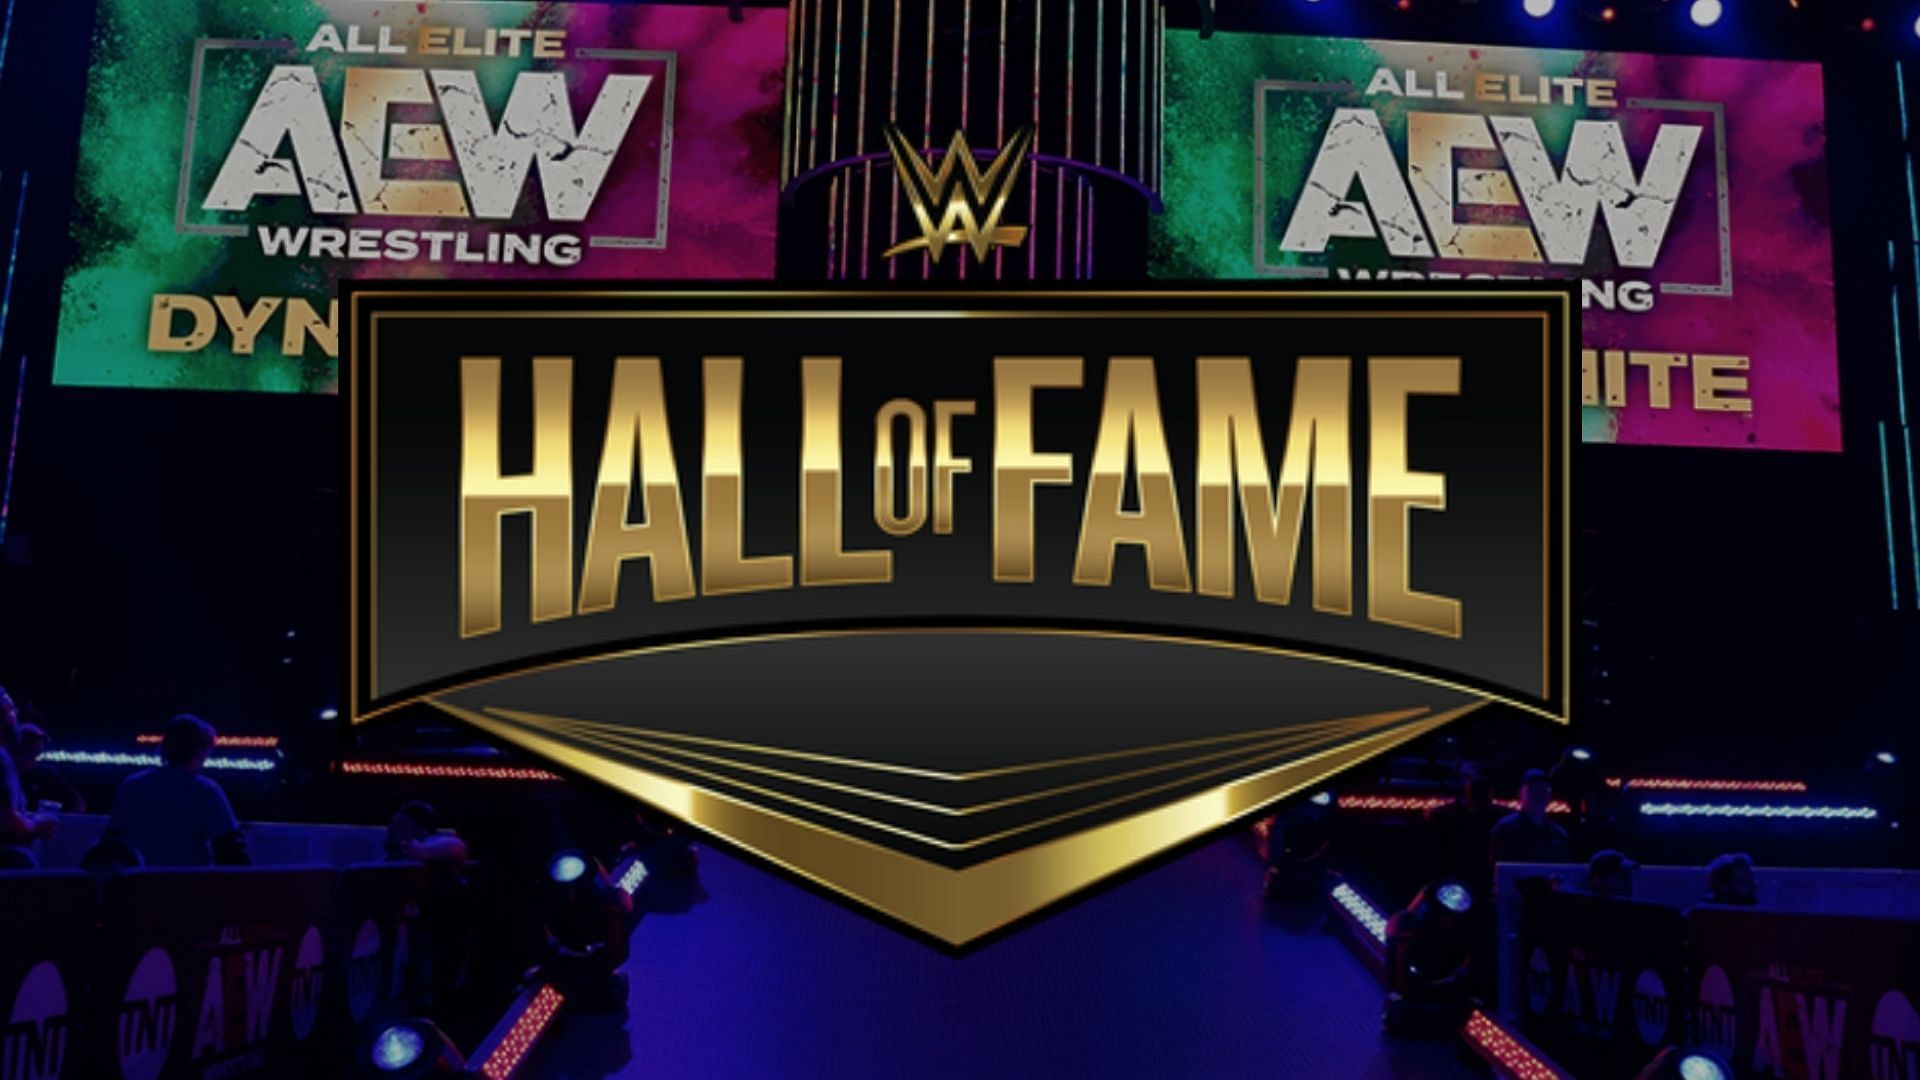 Another WWE Hall of Famer could be joining AEW soon.